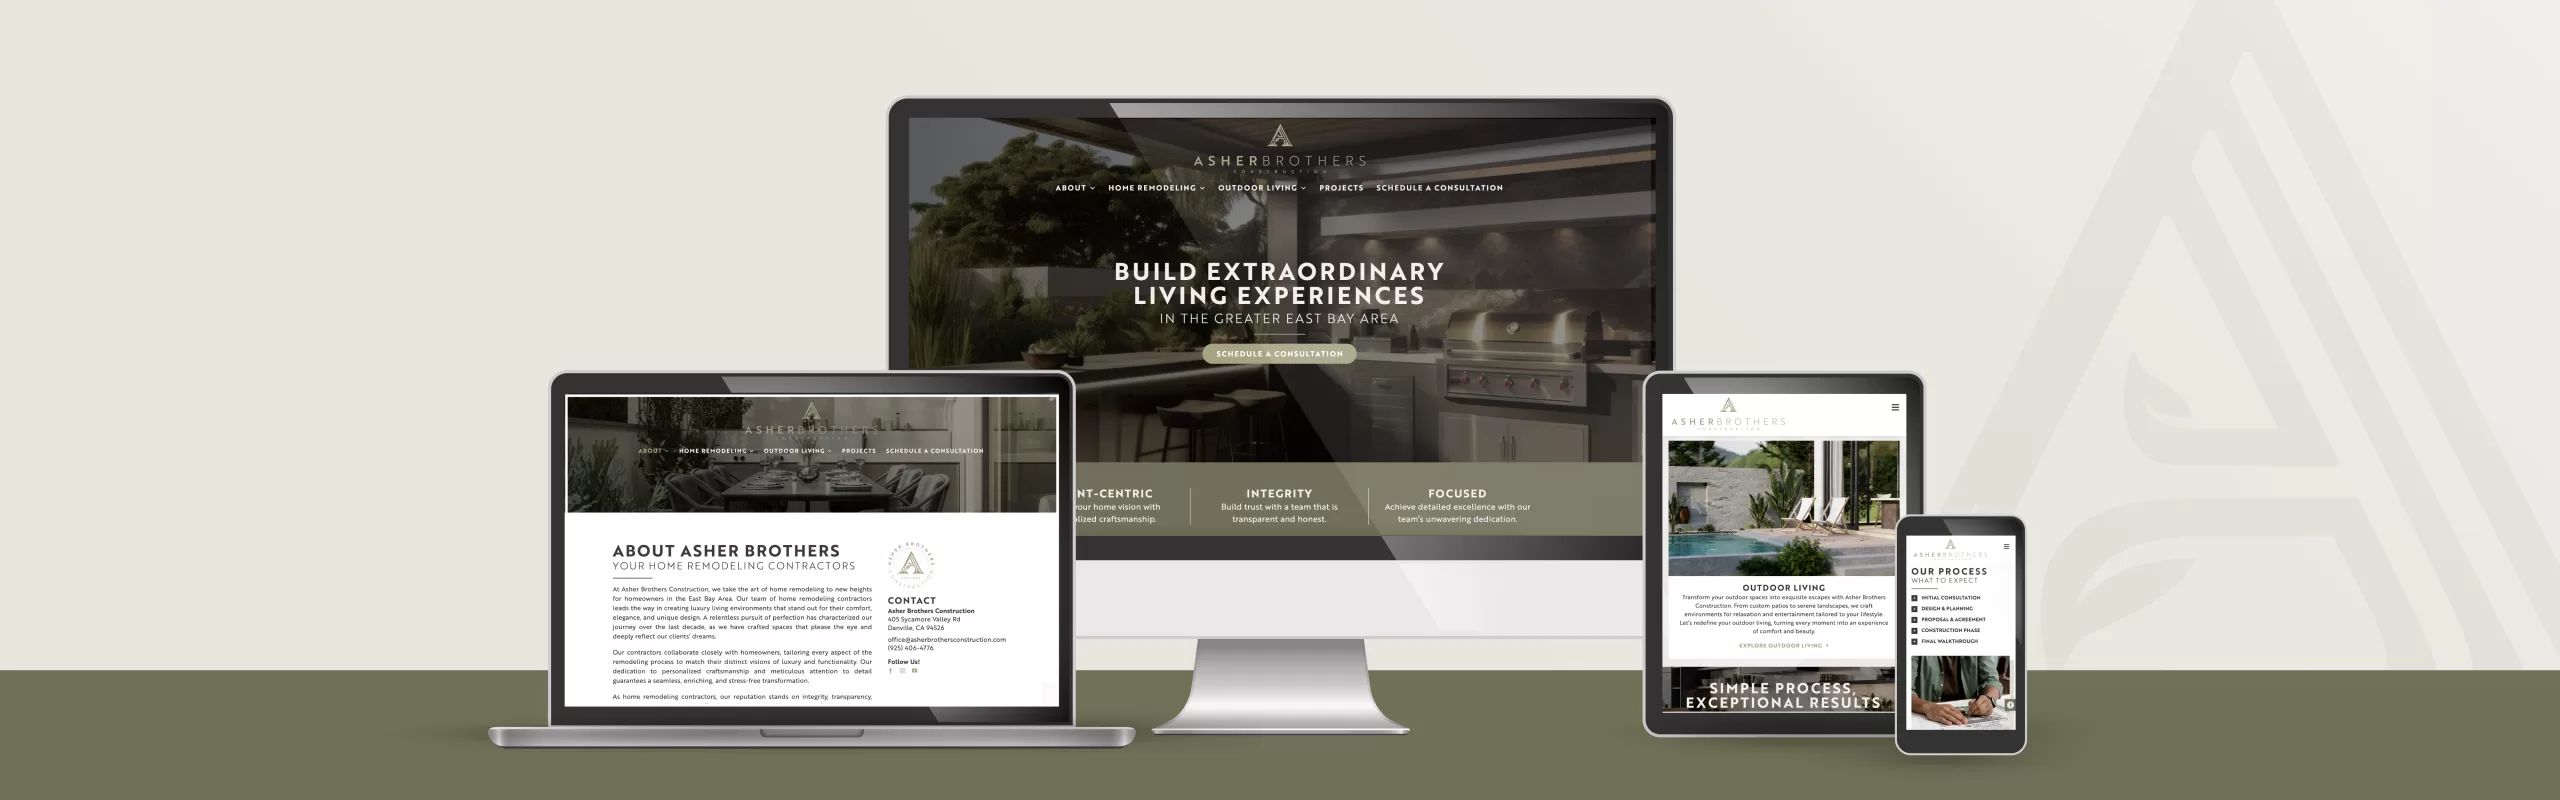 Asher Brothers Construction web design copy